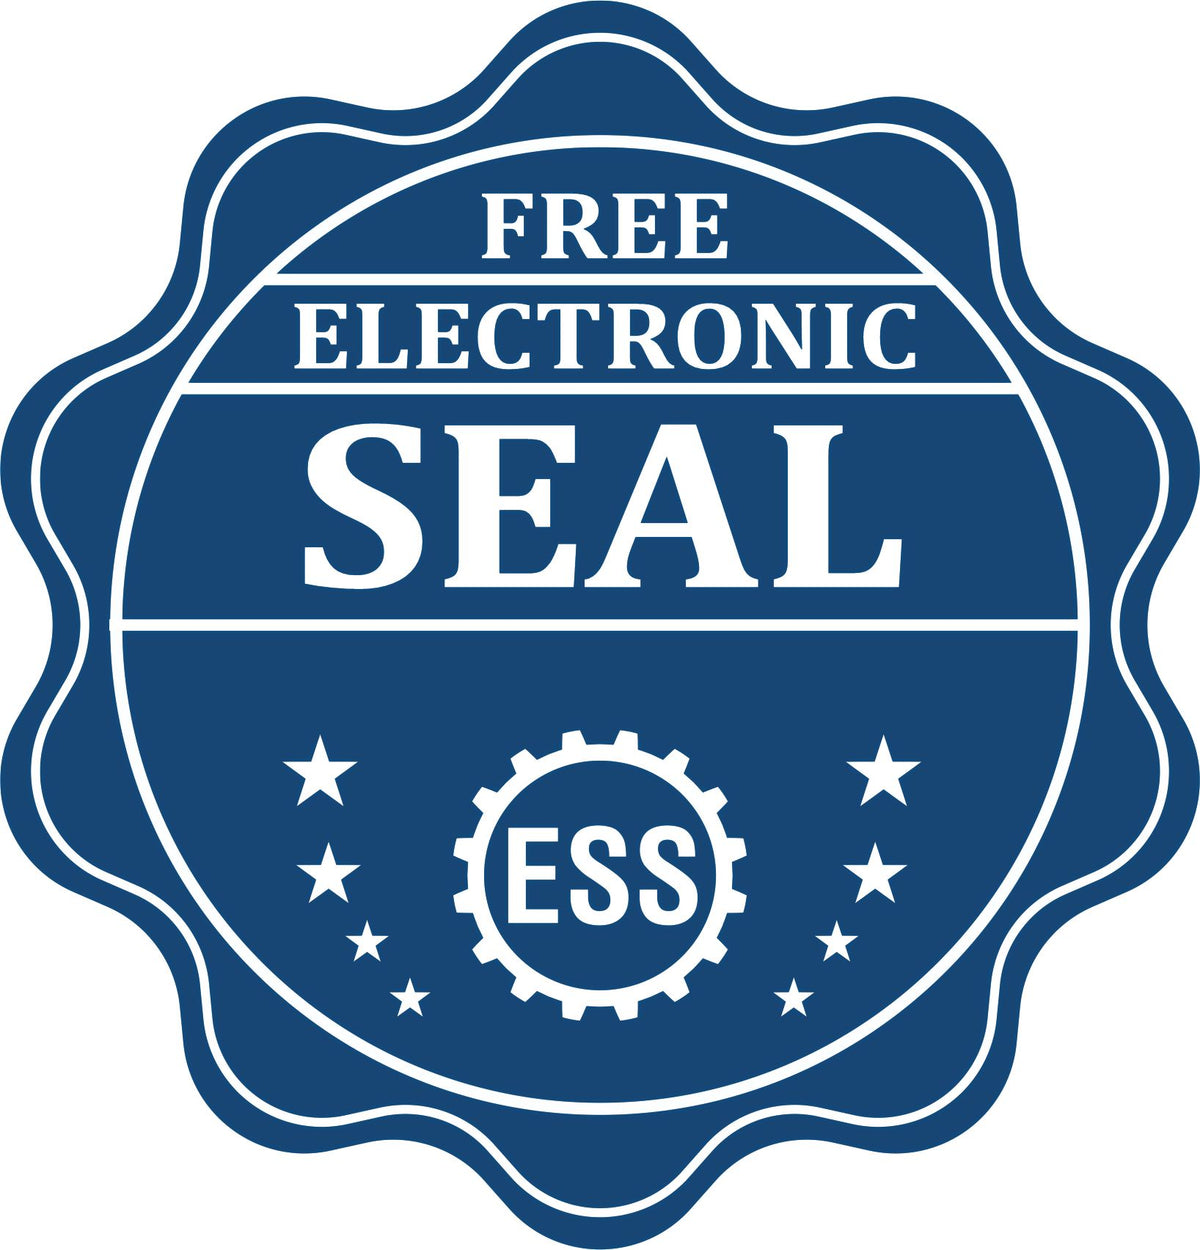 A badge showing a free electronic seal for the Premium MaxLight Pre-Inked Maryland Landscape Architects Stamp with stars and the ESS gear on the emblem.